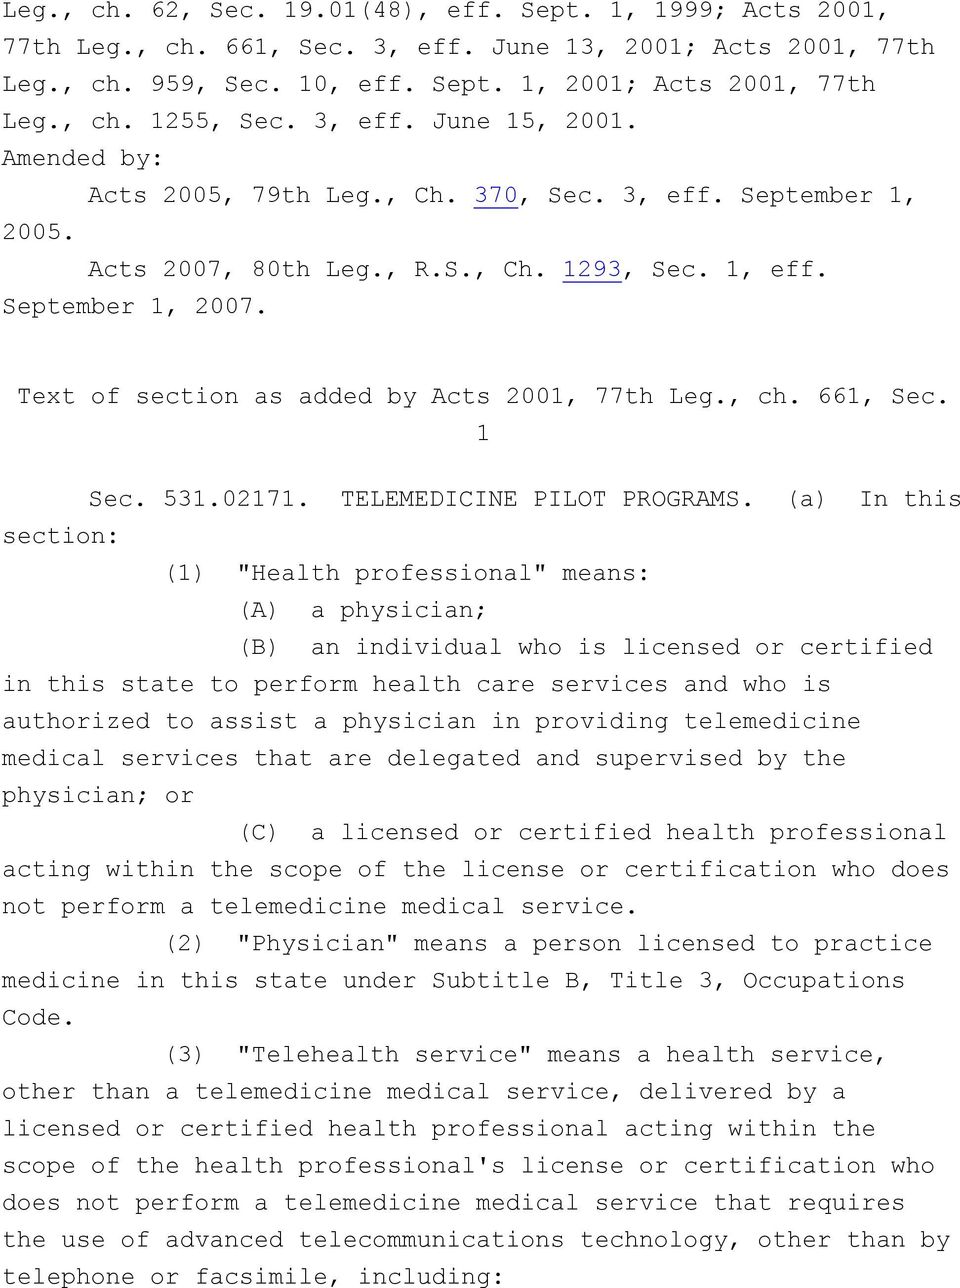 Text of section as added by Acts 2001, 77th Leg., ch. 661, Sec. 1 Sec. 531.02171. TELEMEDICINE PILOT PROGRAMS.